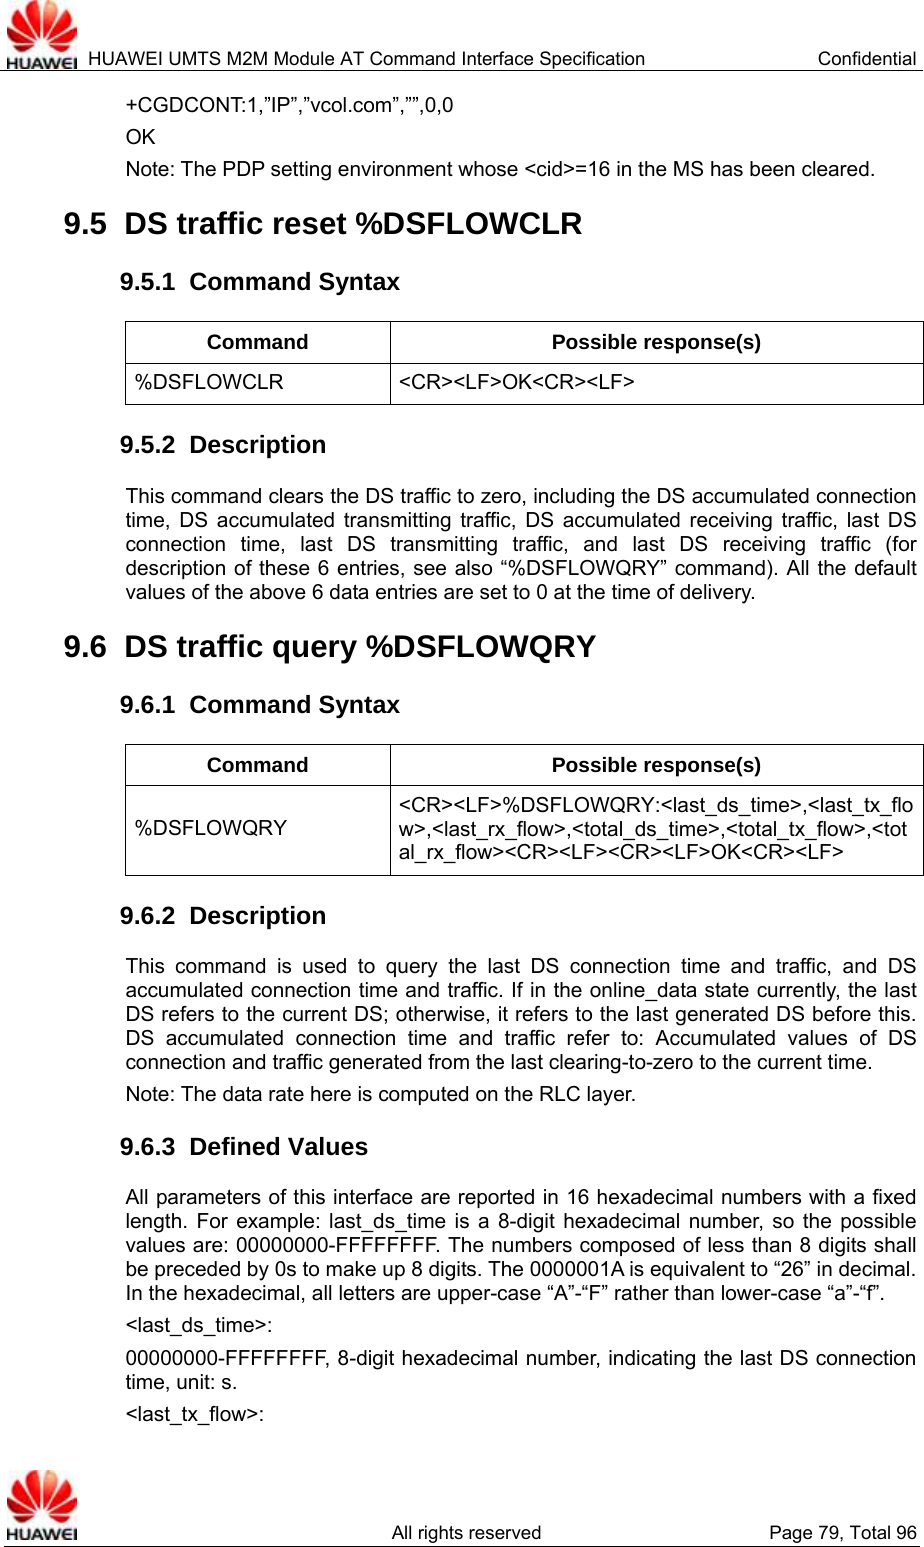  HUAWEI UMTS M2M Module AT Command Interface Specification  Confidential   All rights reserved  Page 79, Total 96 +CGDCONT:1,”IP”,”vcol.com”,””,0,0 OK Note: The PDP setting environment whose &lt;cid&gt;=16 in the MS has been cleared.   9.5  DS traffic reset %DSFLOWCLR   9.5.1  Command Syntax Command Possible response(s) %DSFLOWCLR &lt;CR&gt;&lt;LF&gt;OK&lt;CR&gt;&lt;LF&gt; 9.5.2  Description This command clears the DS traffic to zero, including the DS accumulated connection time, DS accumulated transmitting traffic, DS accumulated receiving traffic, last DS connection time, last DS transmitting traffic, and last DS receiving traffic (for description of these 6 entries, see also “%DSFLOWQRY” command). All the default values of the above 6 data entries are set to 0 at the time of delivery.   9.6  DS traffic query %DSFLOWQRY   9.6.1  Command Syntax Command Possible response(s) %DSFLOWQRY &lt;CR&gt;&lt;LF&gt;%DSFLOWQRY:&lt;last_ds_time&gt;,&lt;last_tx_flow&gt;,&lt;last_rx_flow&gt;,&lt;total_ds_time&gt;,&lt;total_tx_flow&gt;,&lt;total_rx_flow&gt;&lt;CR&gt;&lt;LF&gt;&lt;CR&gt;&lt;LF&gt;OK&lt;CR&gt;&lt;LF&gt; 9.6.2  Description This command is used to query the last DS connection time and traffic, and DS accumulated connection time and traffic. If in the online_data state currently, the last DS refers to the current DS; otherwise, it refers to the last generated DS before this. DS accumulated connection time and traffic refer to: Accumulated values of DS connection and traffic generated from the last clearing-to-zero to the current time.   Note: The data rate here is computed on the RLC layer. 9.6.3  Defined Values All parameters of this interface are reported in 16 hexadecimal numbers with a fixed length. For example: last_ds_time is a 8-digit hexadecimal number, so the possible values are: 00000000-FFFFFFFF. The numbers composed of less than 8 digits shall be preceded by 0s to make up 8 digits. The 0000001A is equivalent to “26” in decimal. In the hexadecimal, all letters are upper-case “A”-“F” rather than lower-case “a”-“f”.   &lt;last_ds_time&gt;:  00000000-FFFFFFFF, 8-digit hexadecimal number, indicating the last DS connection time, unit: s. &lt;last_tx_flow&gt;:  